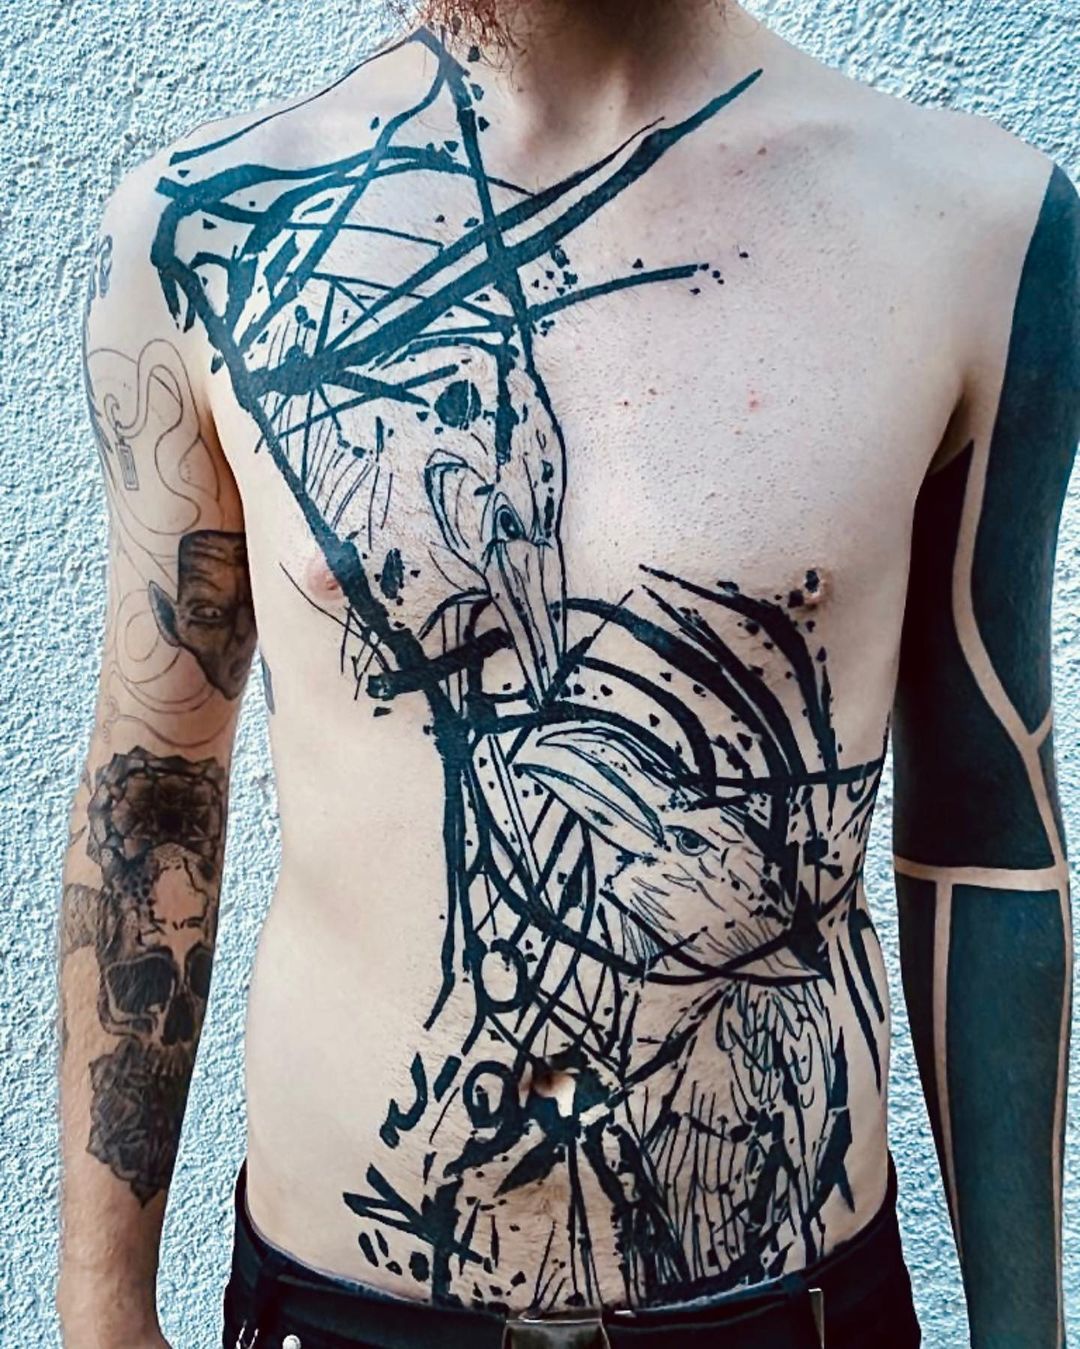 My “upper body” blackout. Still healing. Done in Portugal in Poison Tattoo  Shop! : r/tattoos